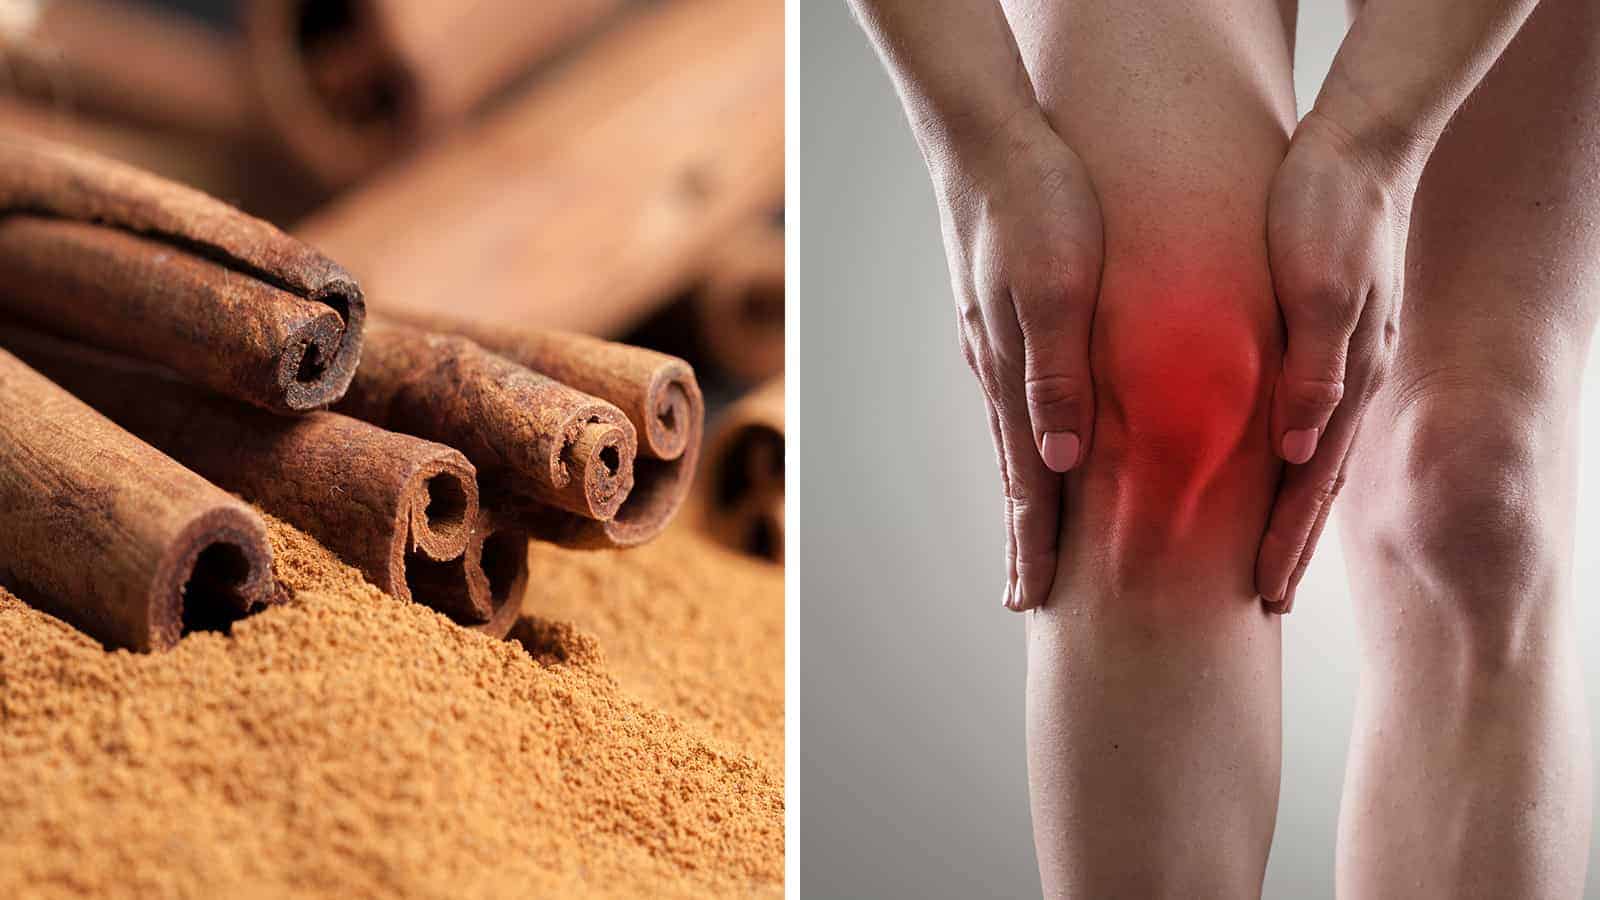 10 Ways to Use Cinnamon to Relieve Inflammation, According to Science